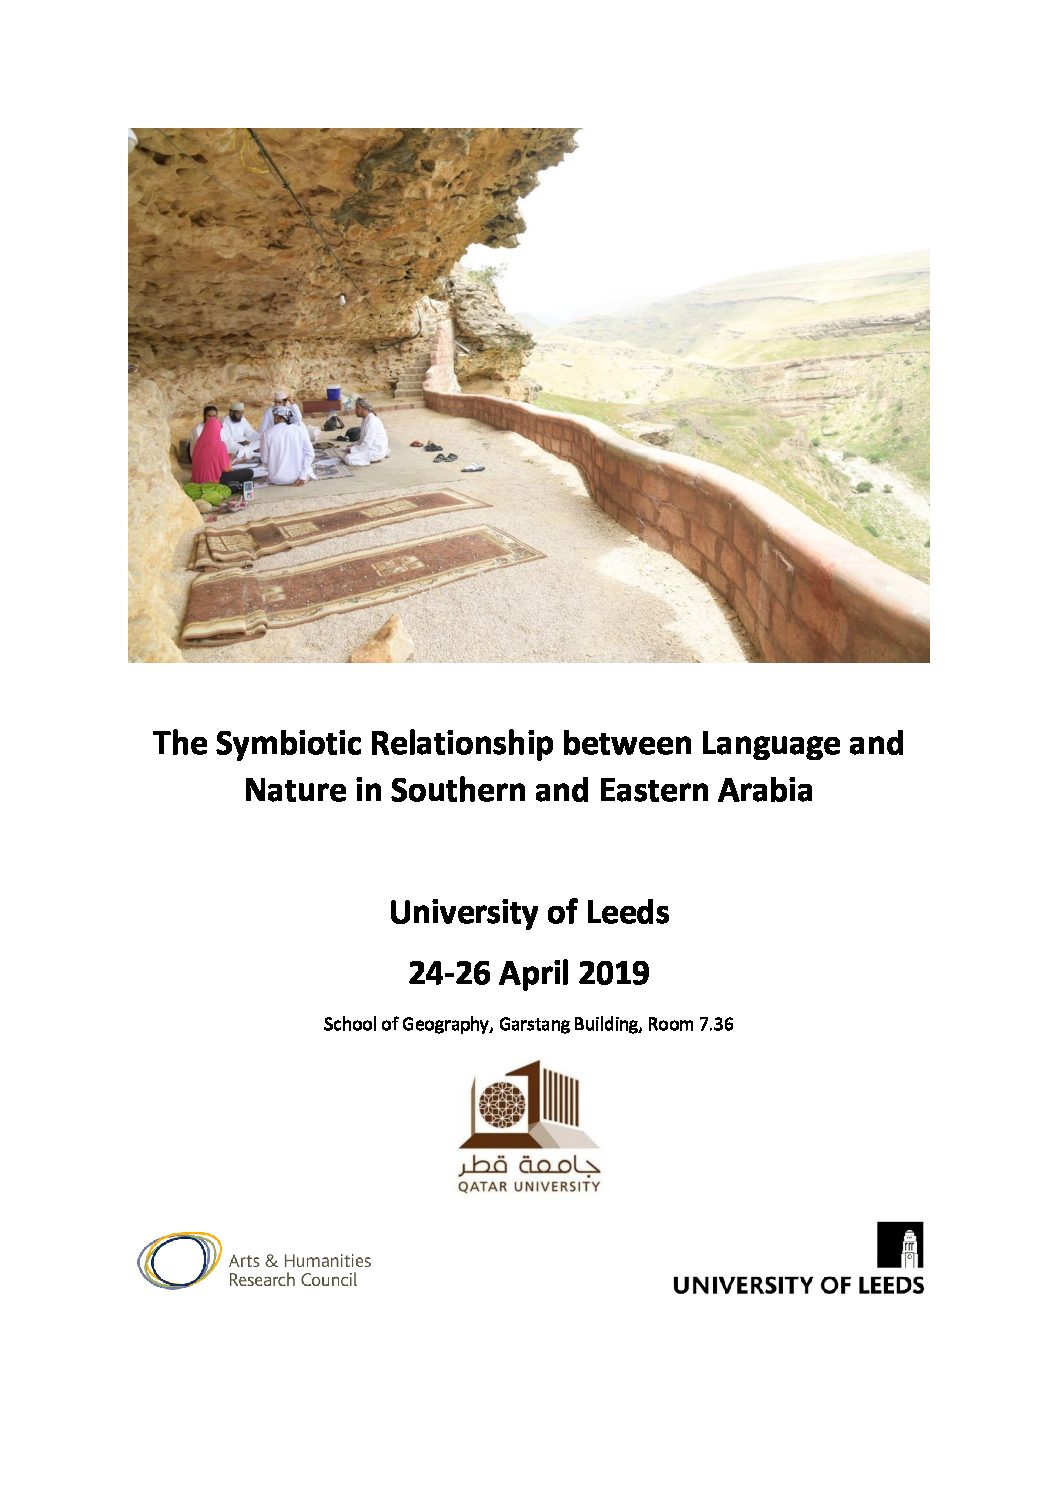 The Symbiotic Relationship between Language and Nature in Southern and Eastern Arabia